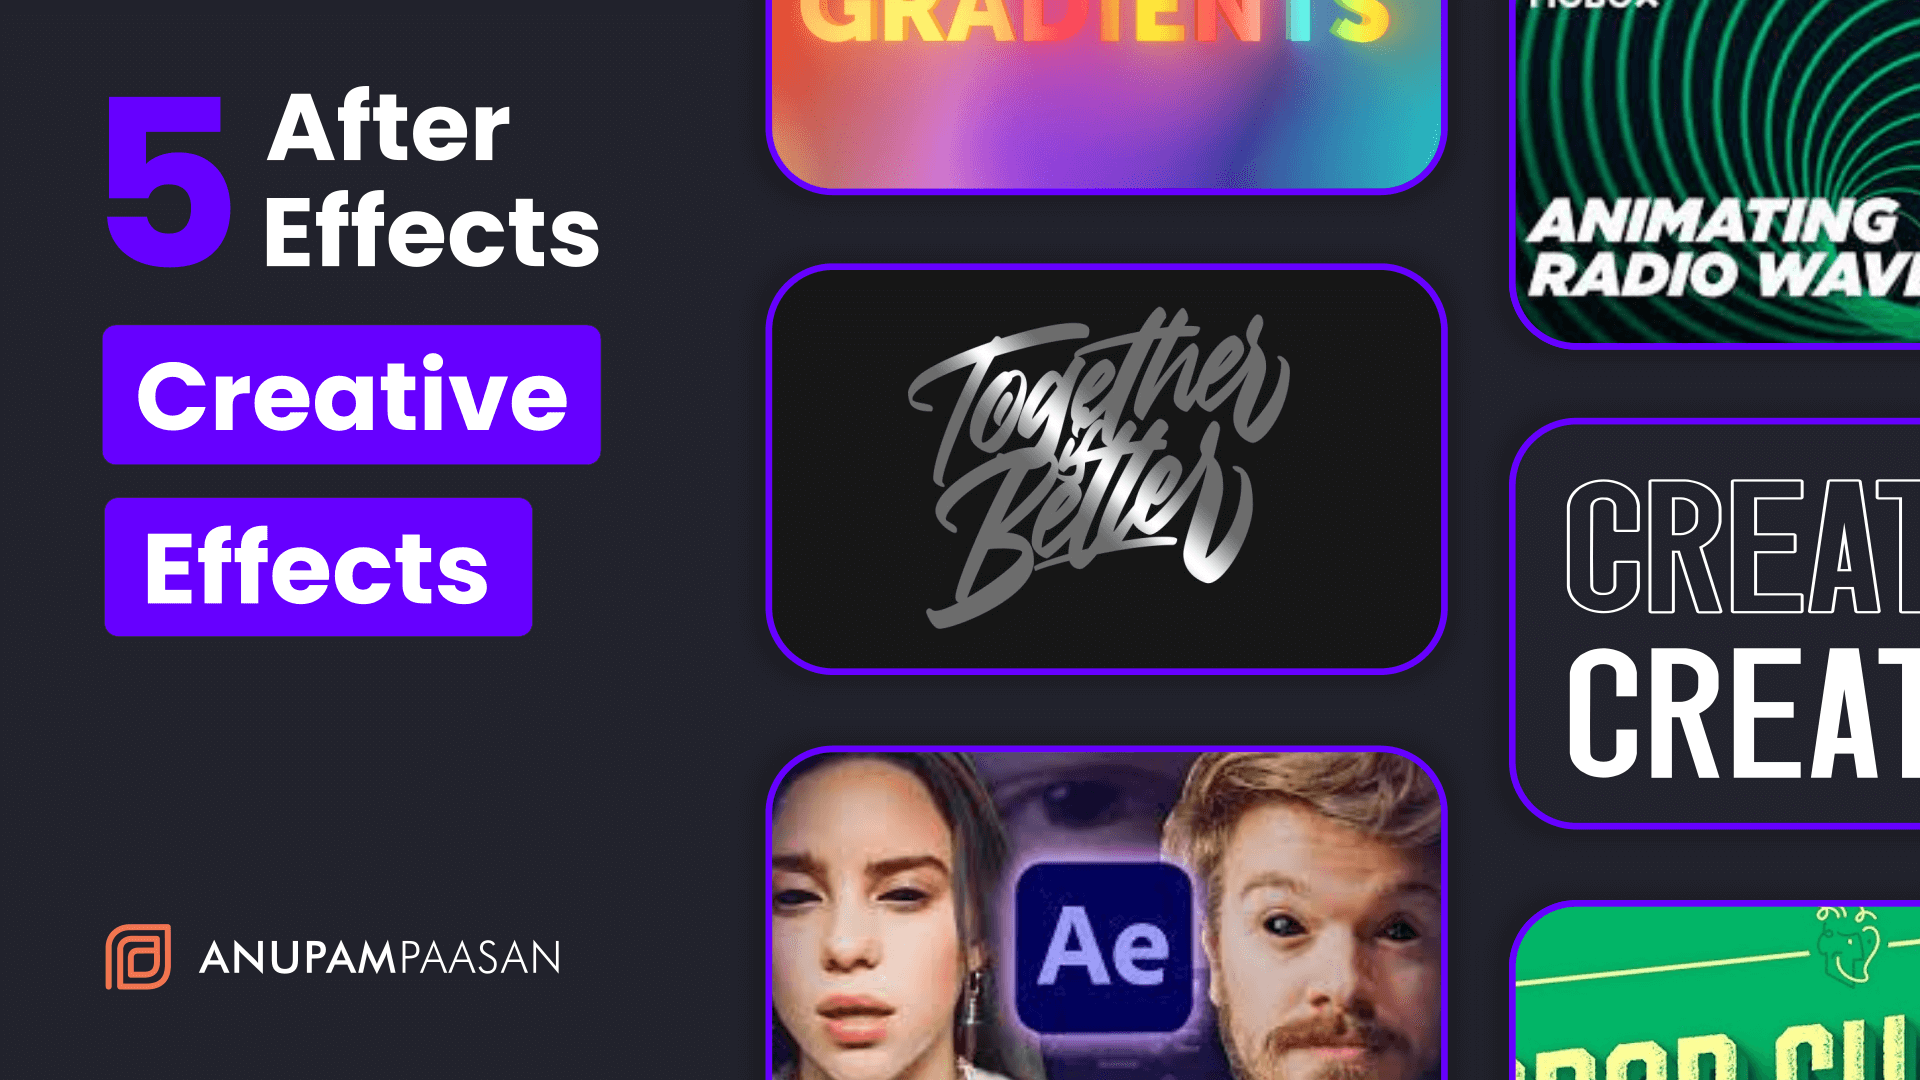 5 After Effects Creative Effects - Featured Image - Anupam Paasan Digital